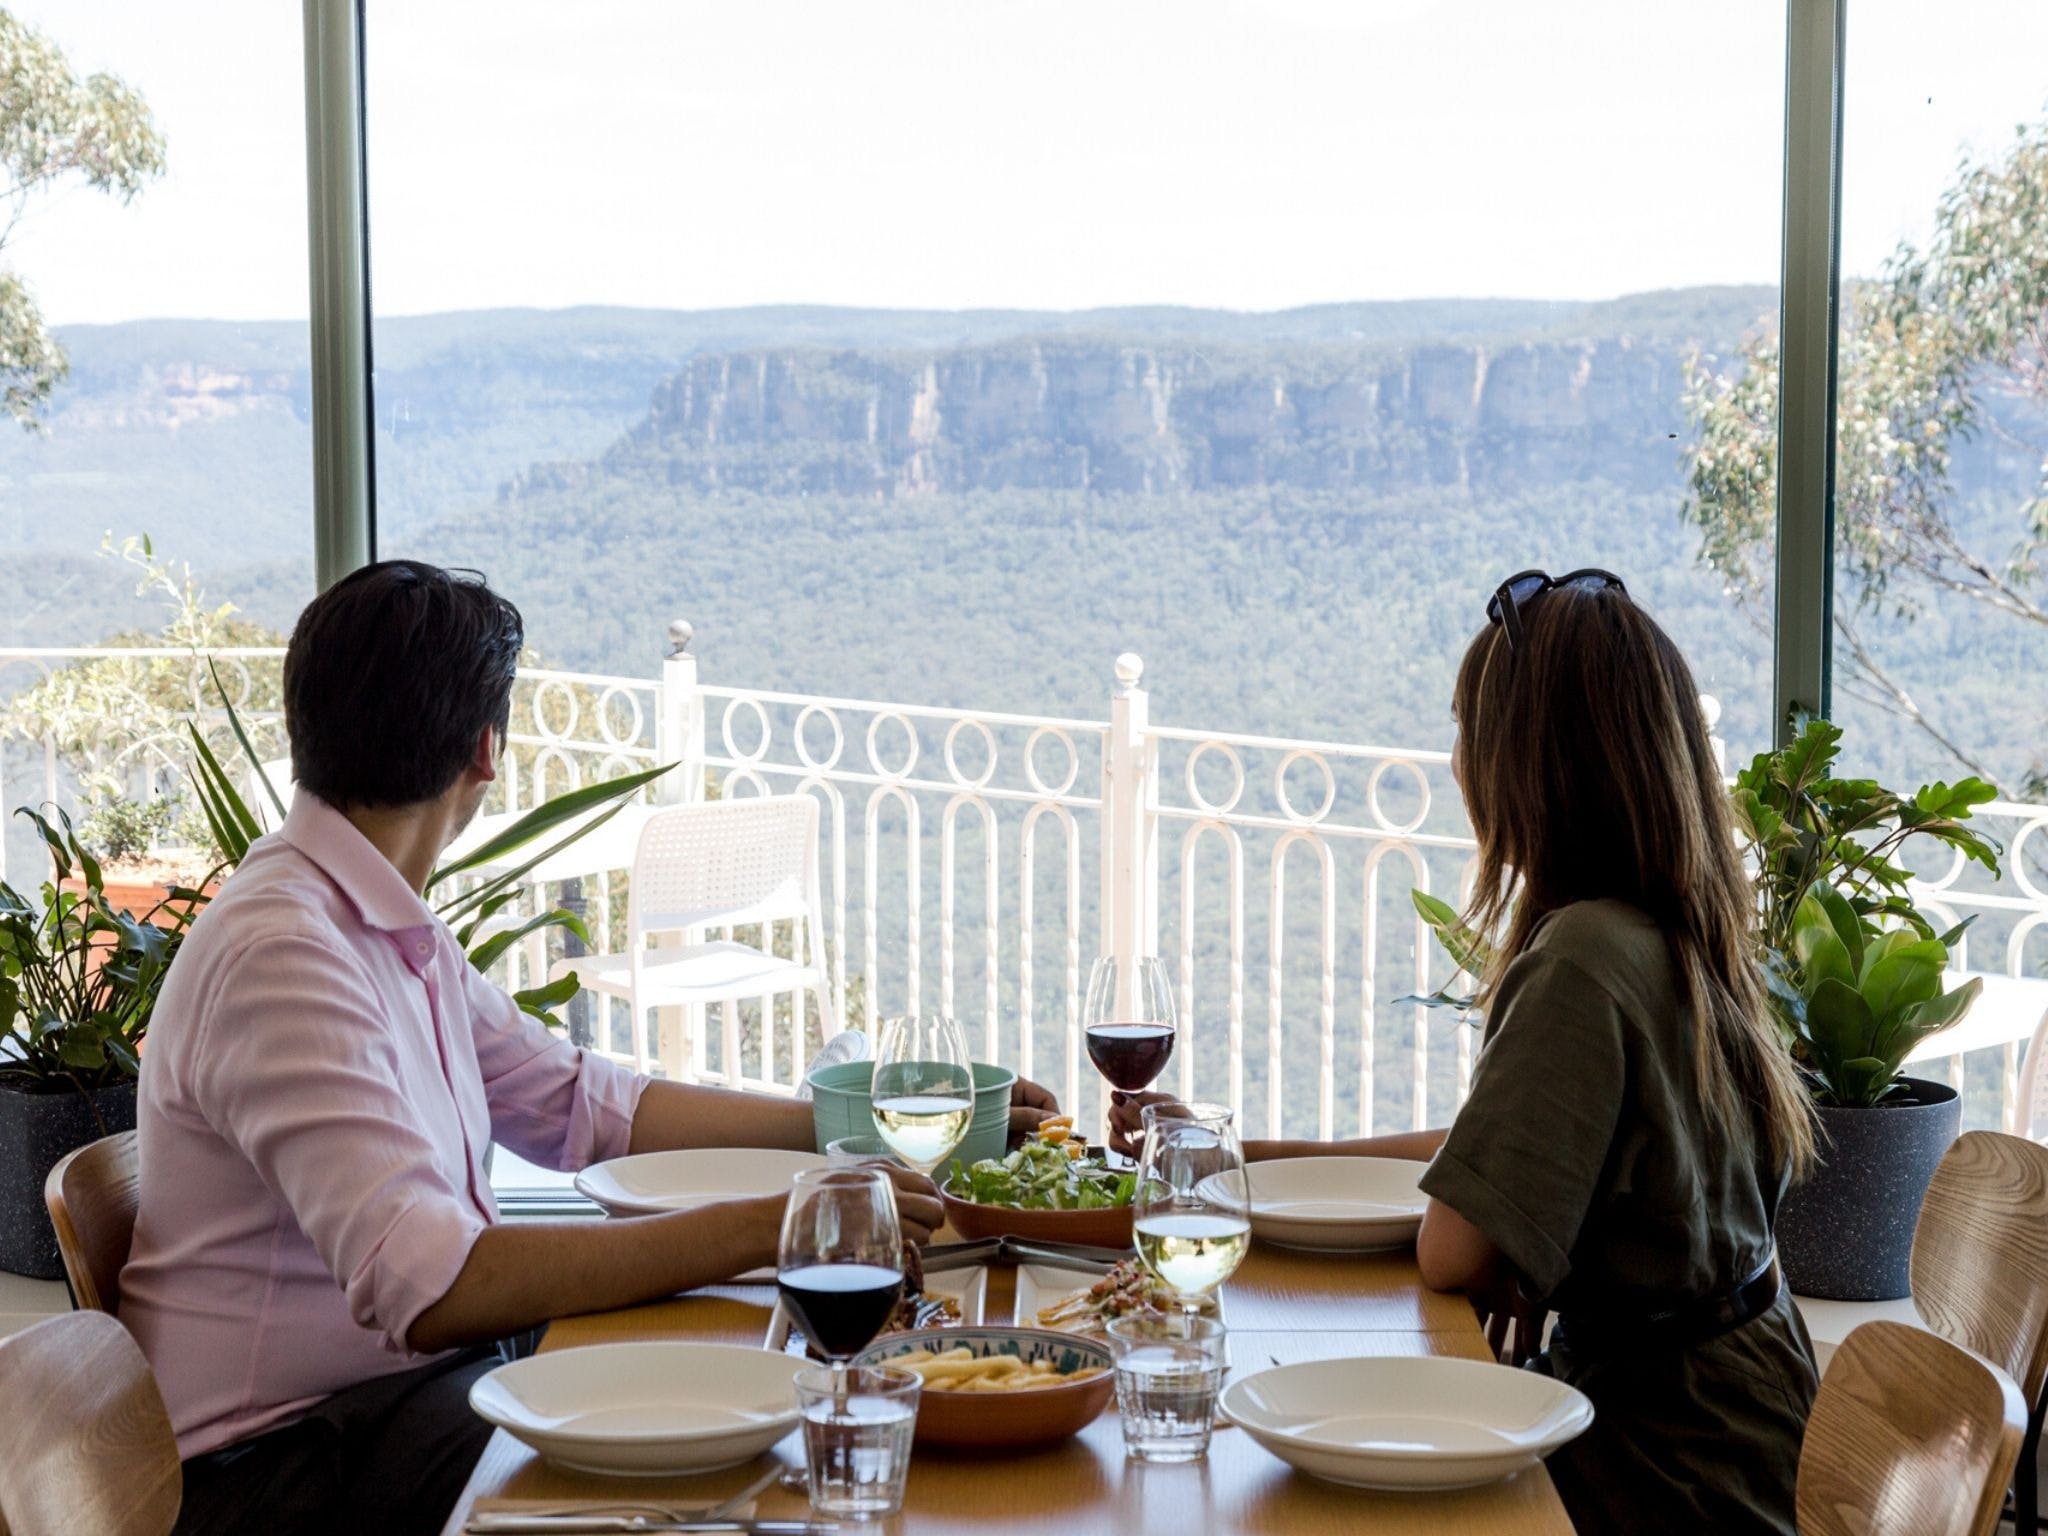 Christmas Day Lunch at The Lookout Echo Point - Accommodation Mount Tamborine